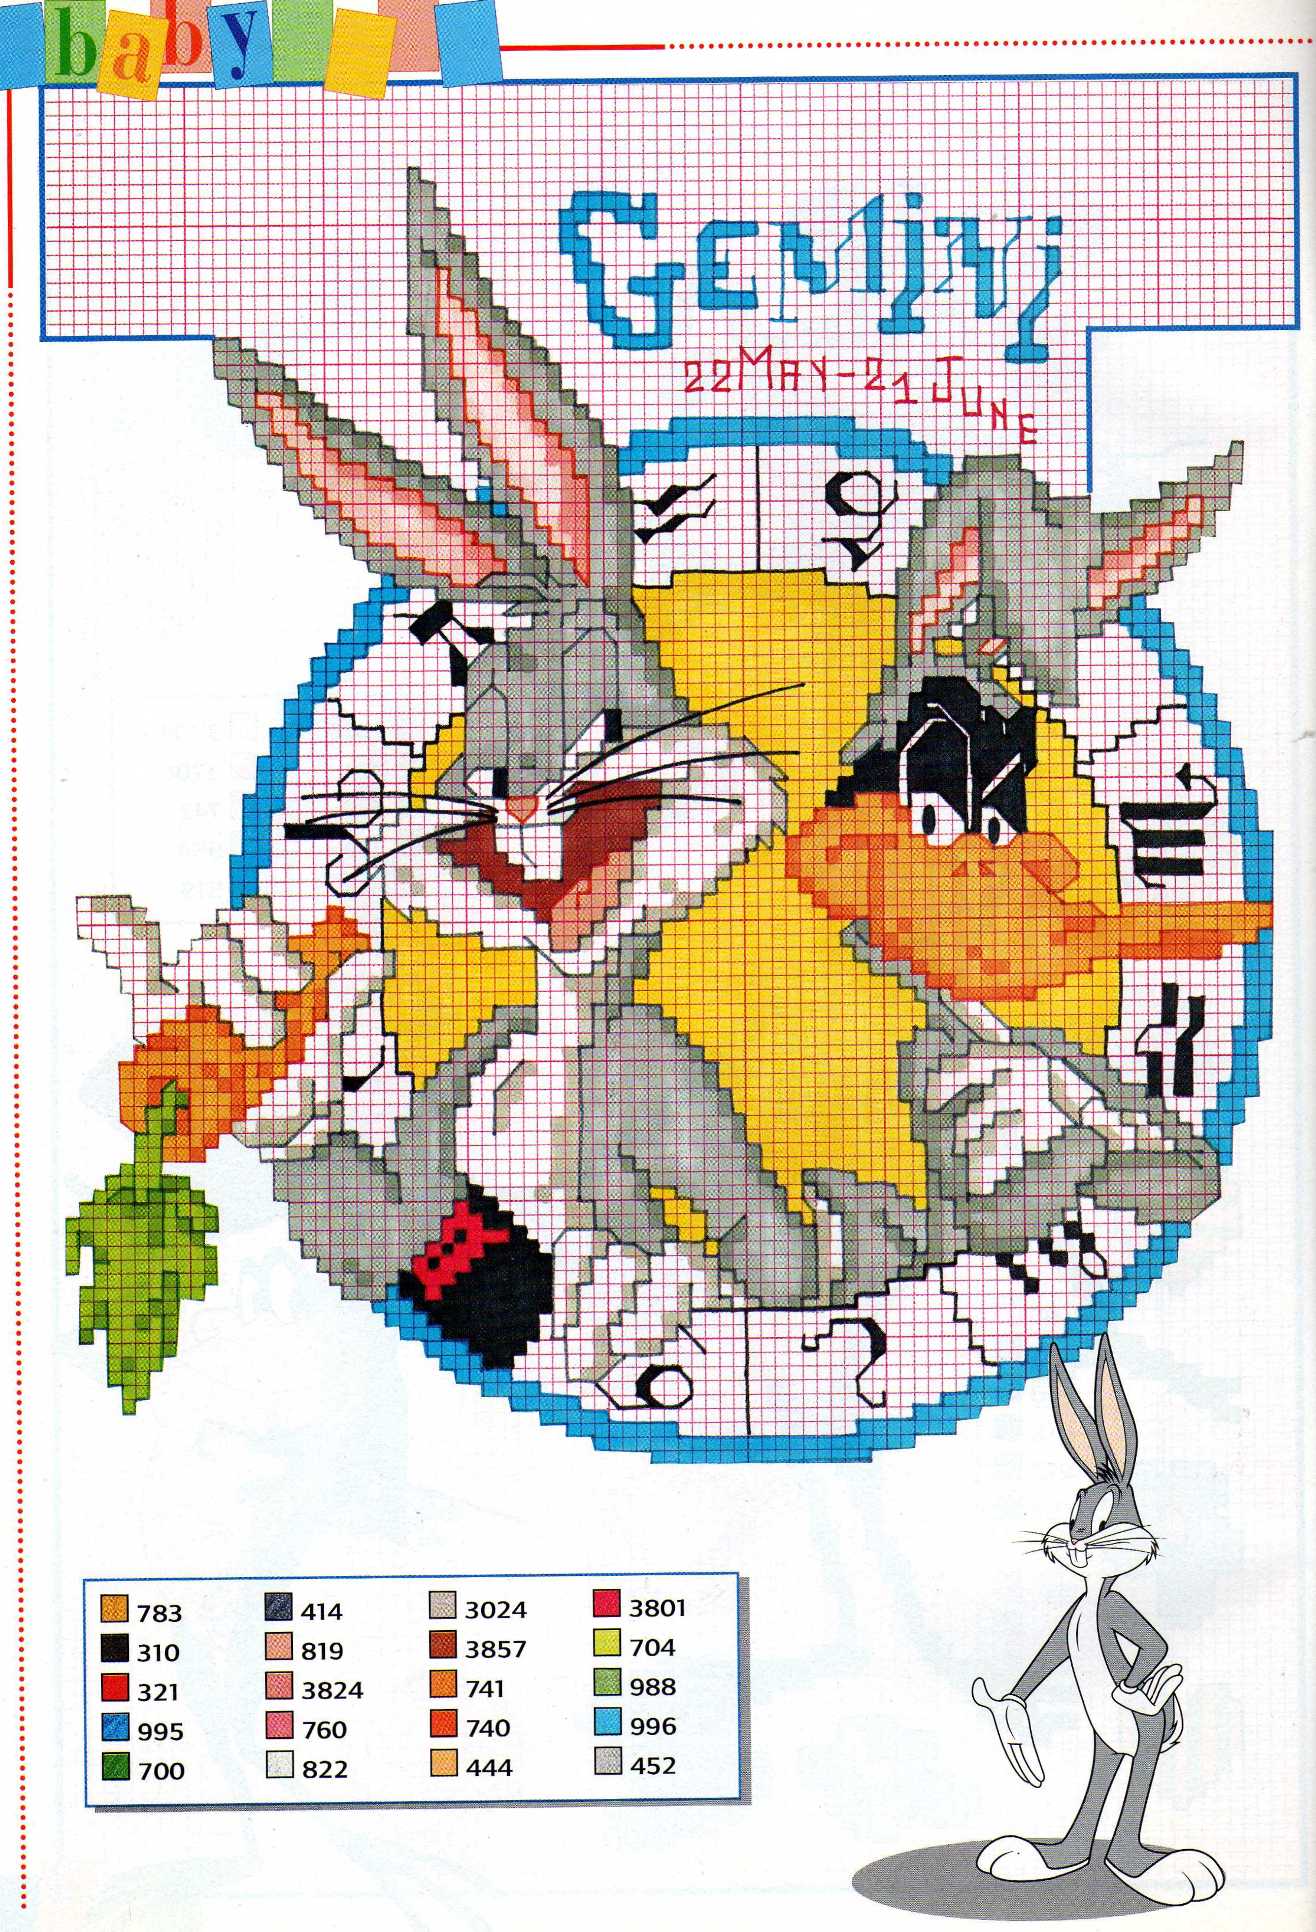 Bugs Bunny and Daffy Duck with zodiac signs